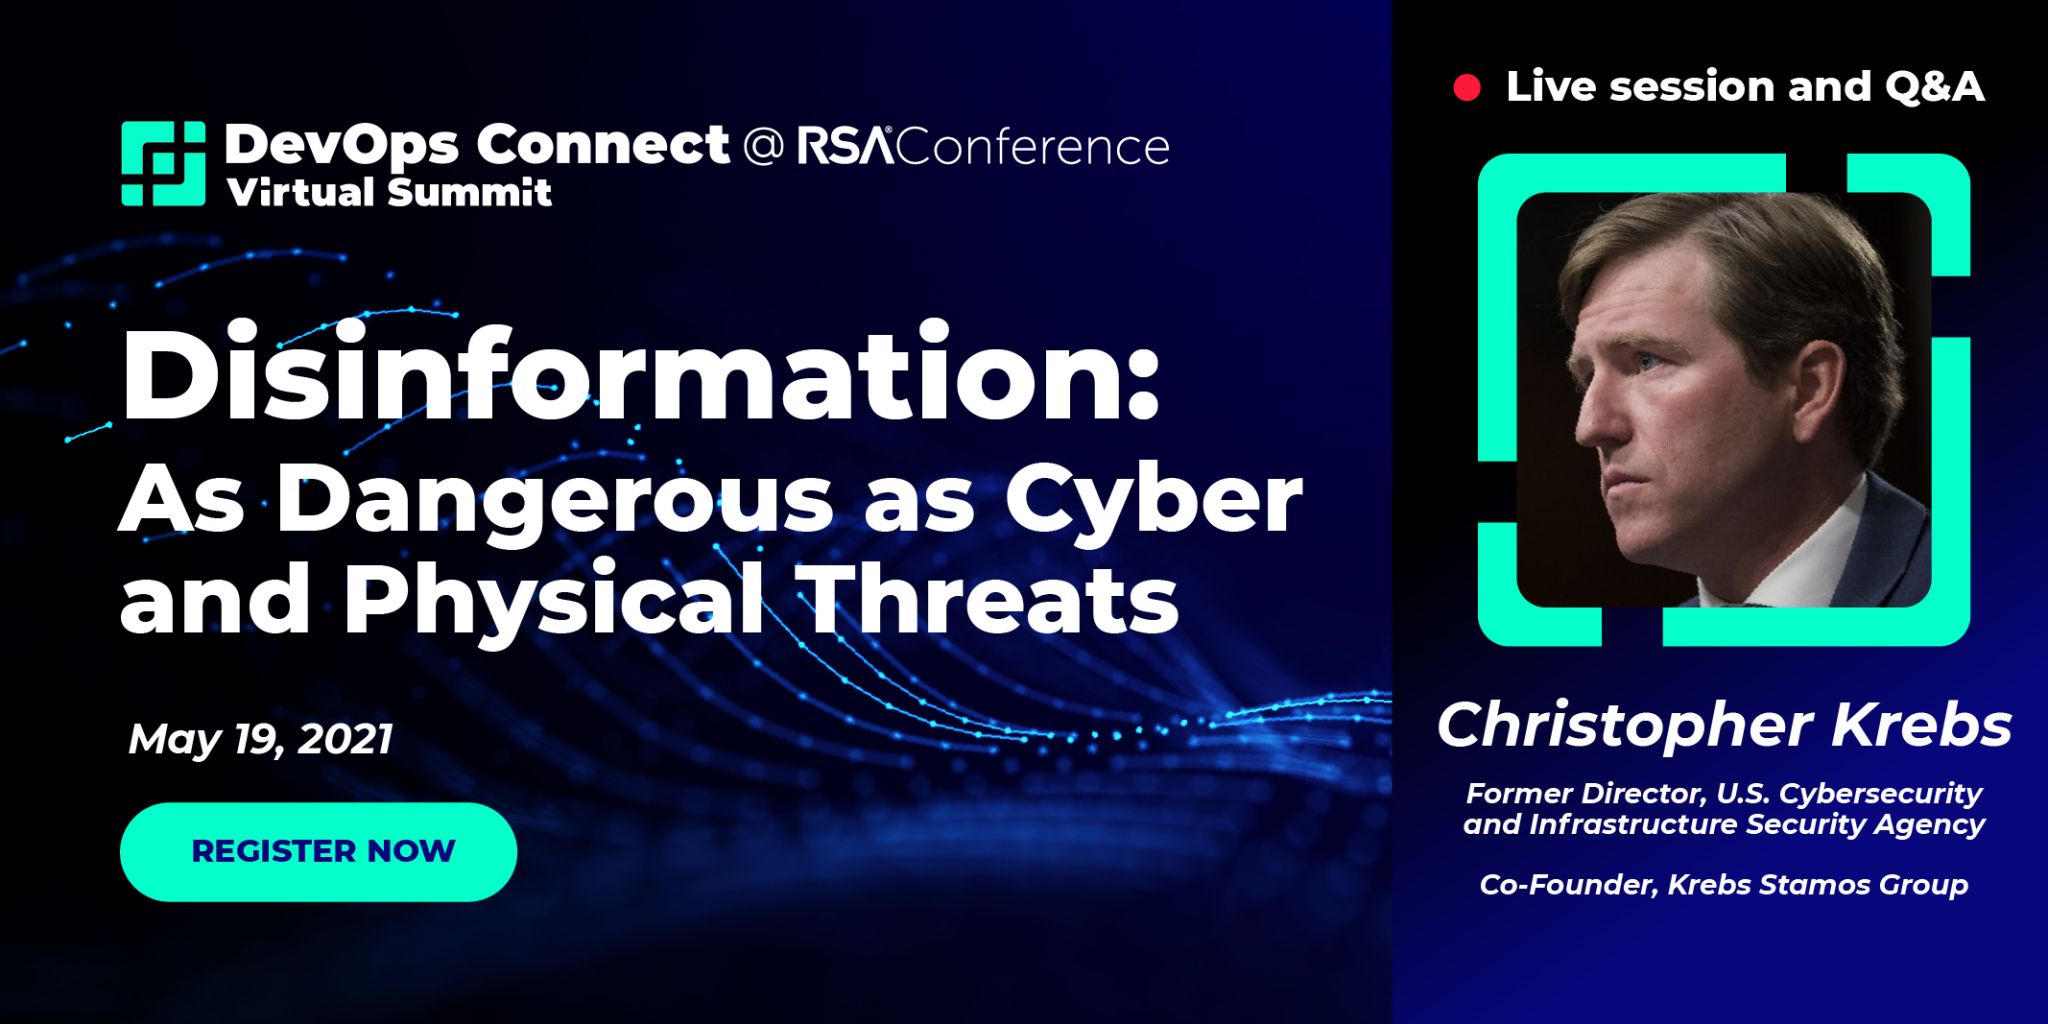 Christopher Krebs - CISA - DHS - RSAC - RSA Conference - DevOps Connect - cybersecurity - DevSecOps - disinformation - Chris Krebs - Department of Homeland Security - cyber threats - cyber security - virtual event - security - cloud security